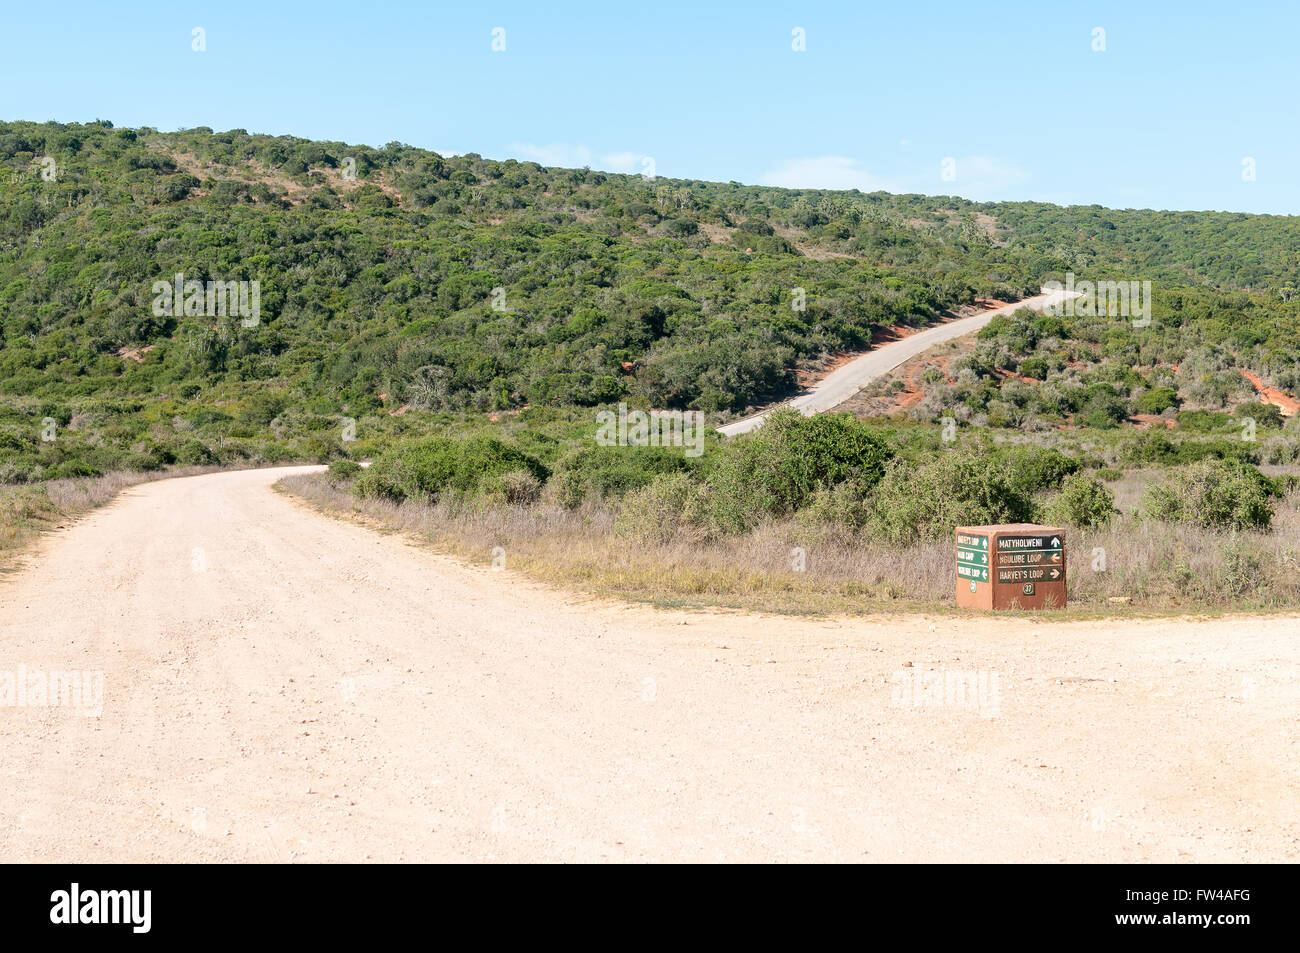 ADDO ELEPHANT NATIONAL PARK, SOUTH AFRICA - FEBRUARY 23, 2016: A typical landscape in the Addo Elephant National Park Stock Photo